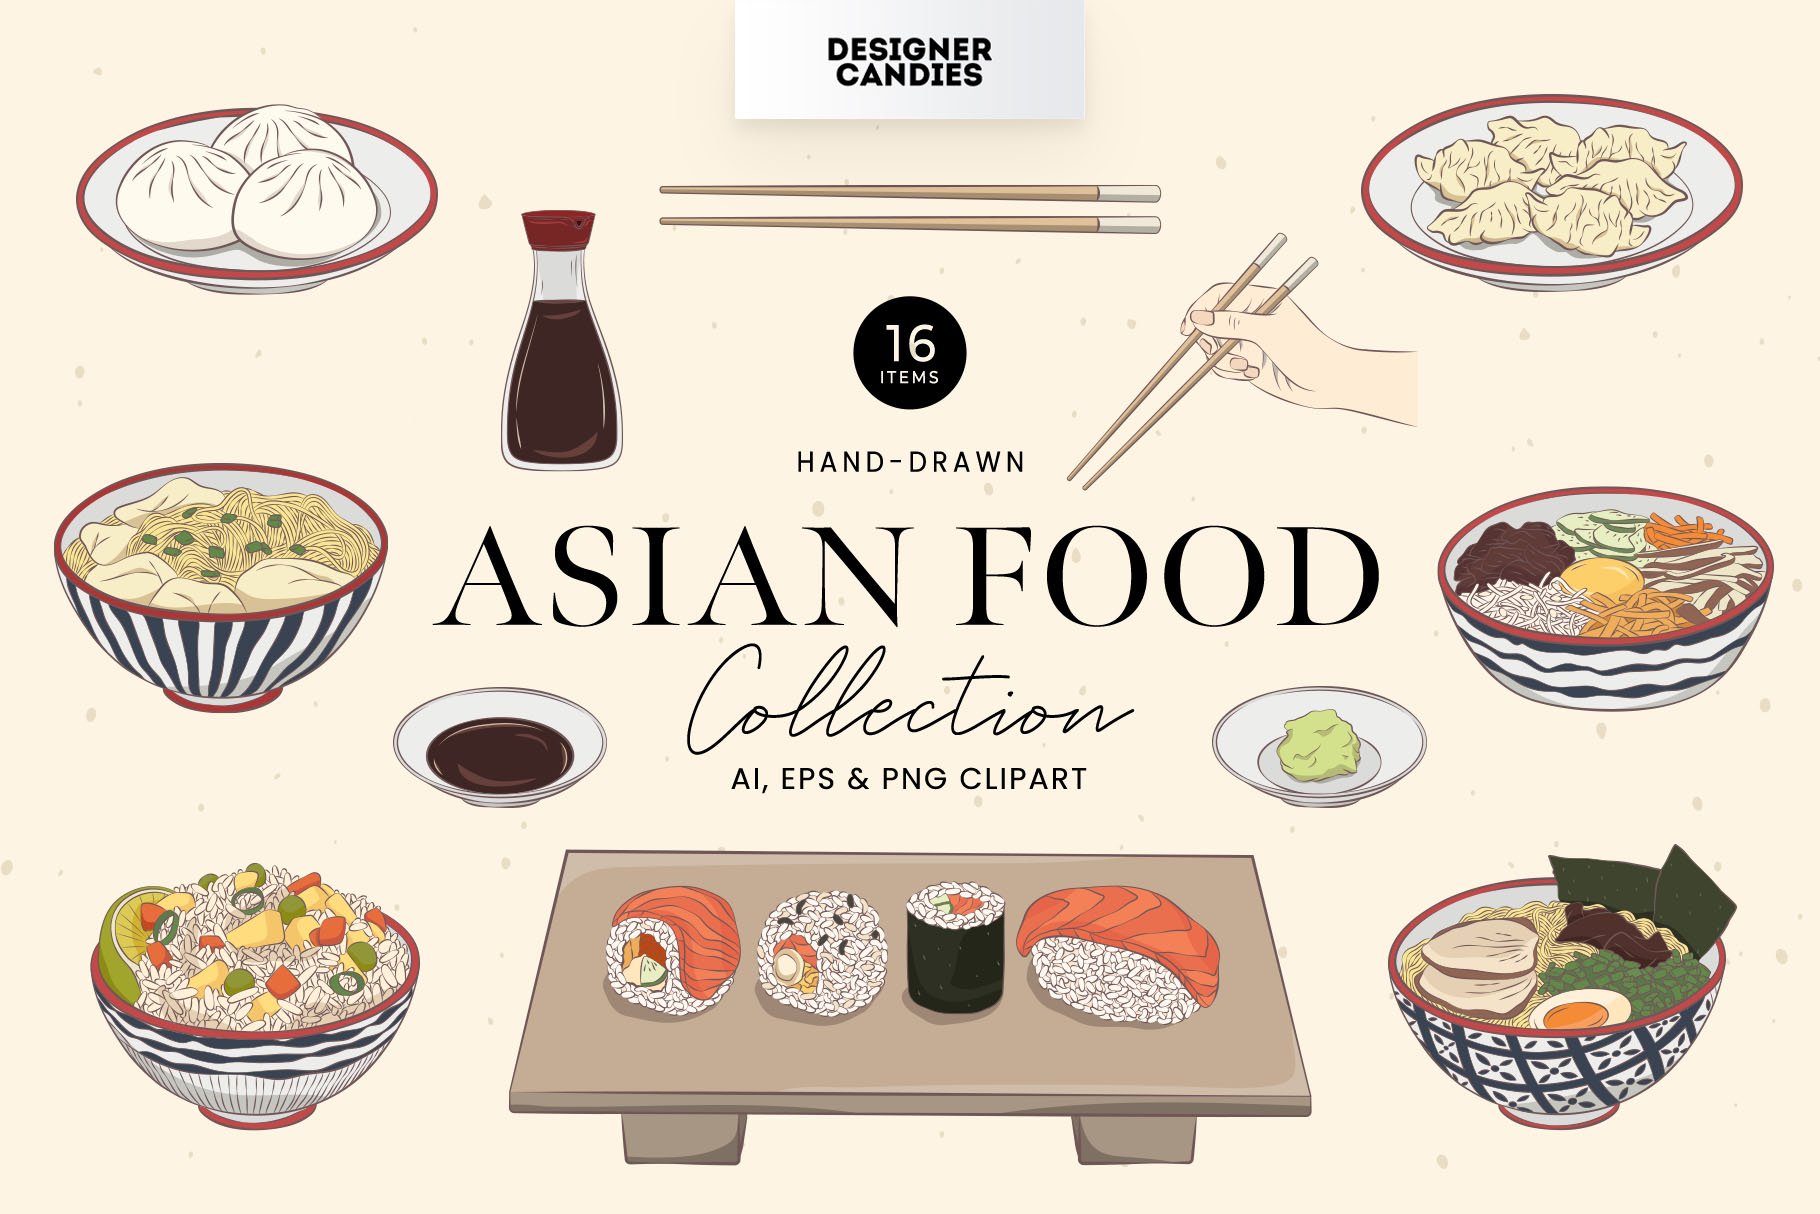 Asian Food Illustrations cover image.